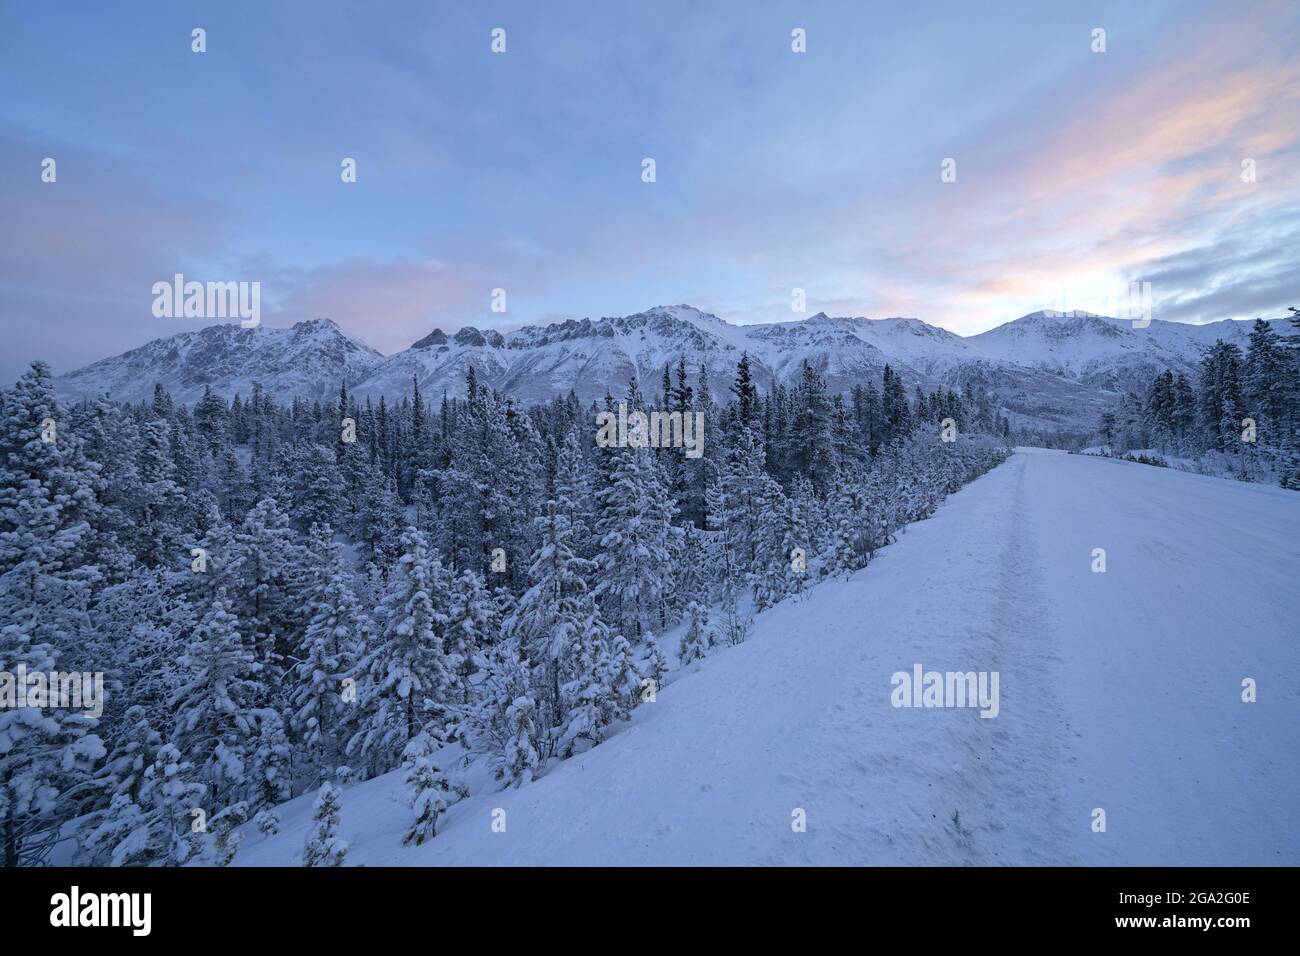 The Alaska Highway stretching into the distance with the morning light rising behind the snowy mountaintops; Whitehorse, Yukon, Canada Stock Photo